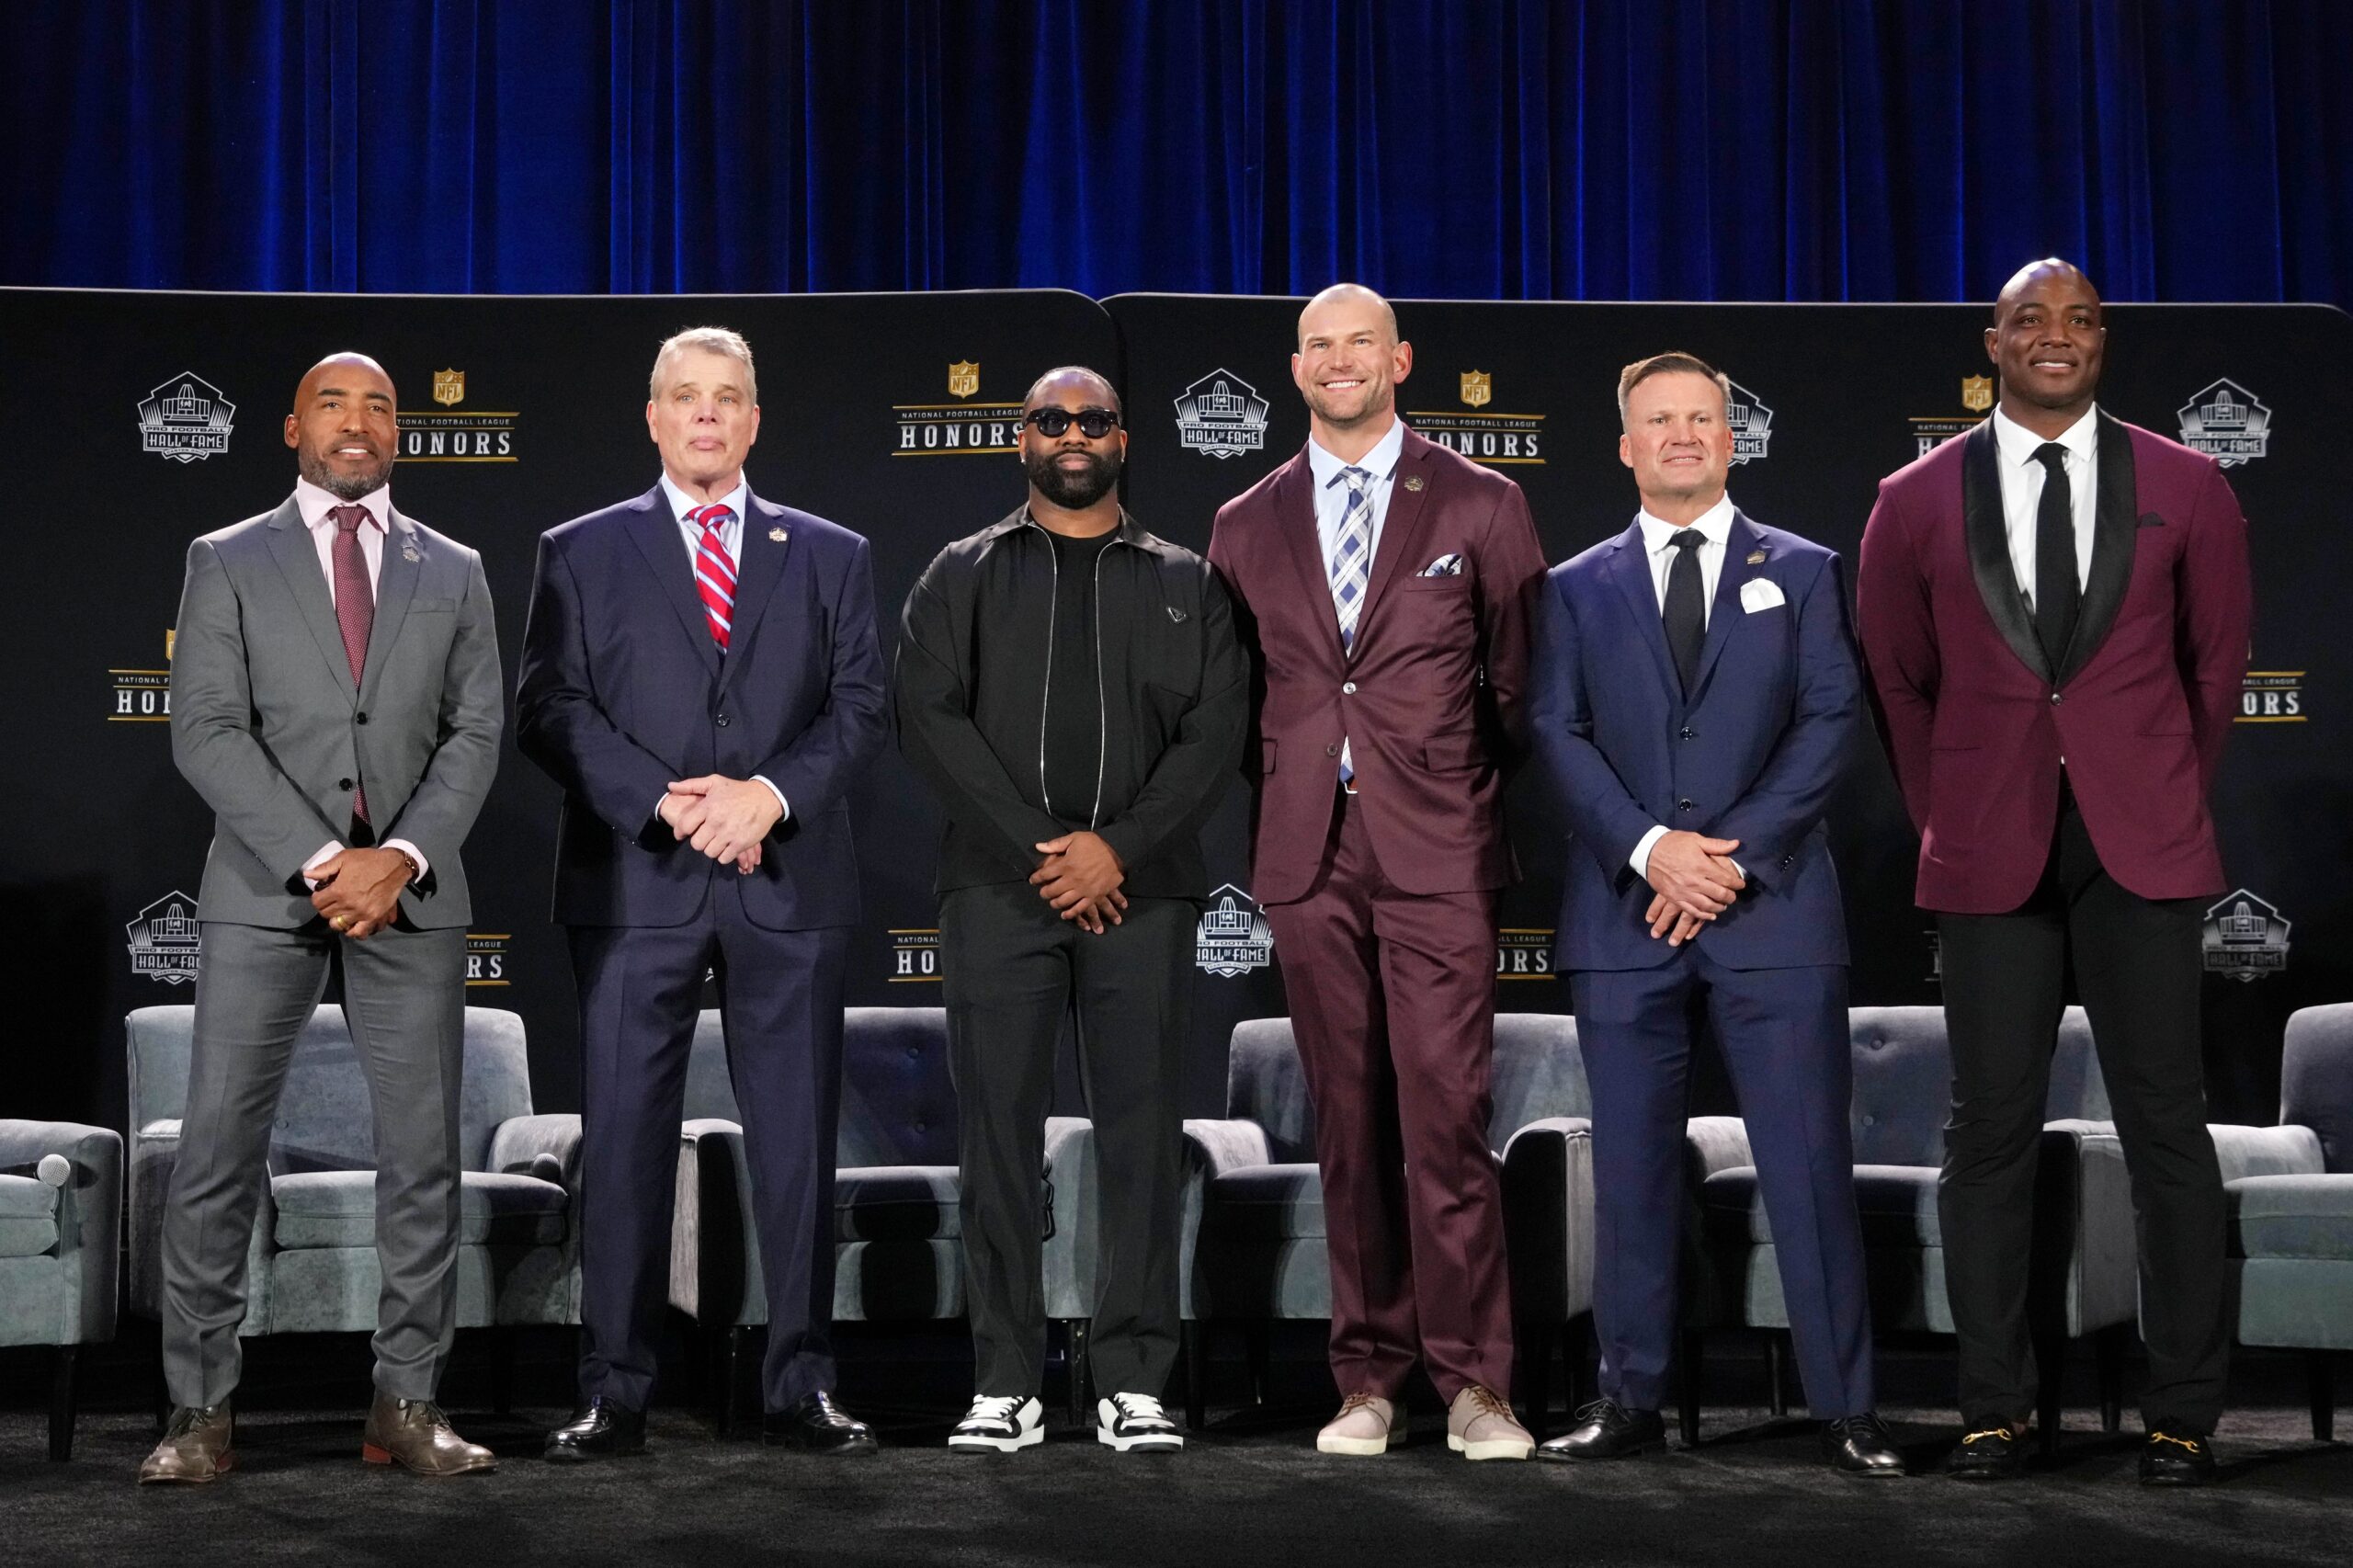 pro football hall of fame inductees